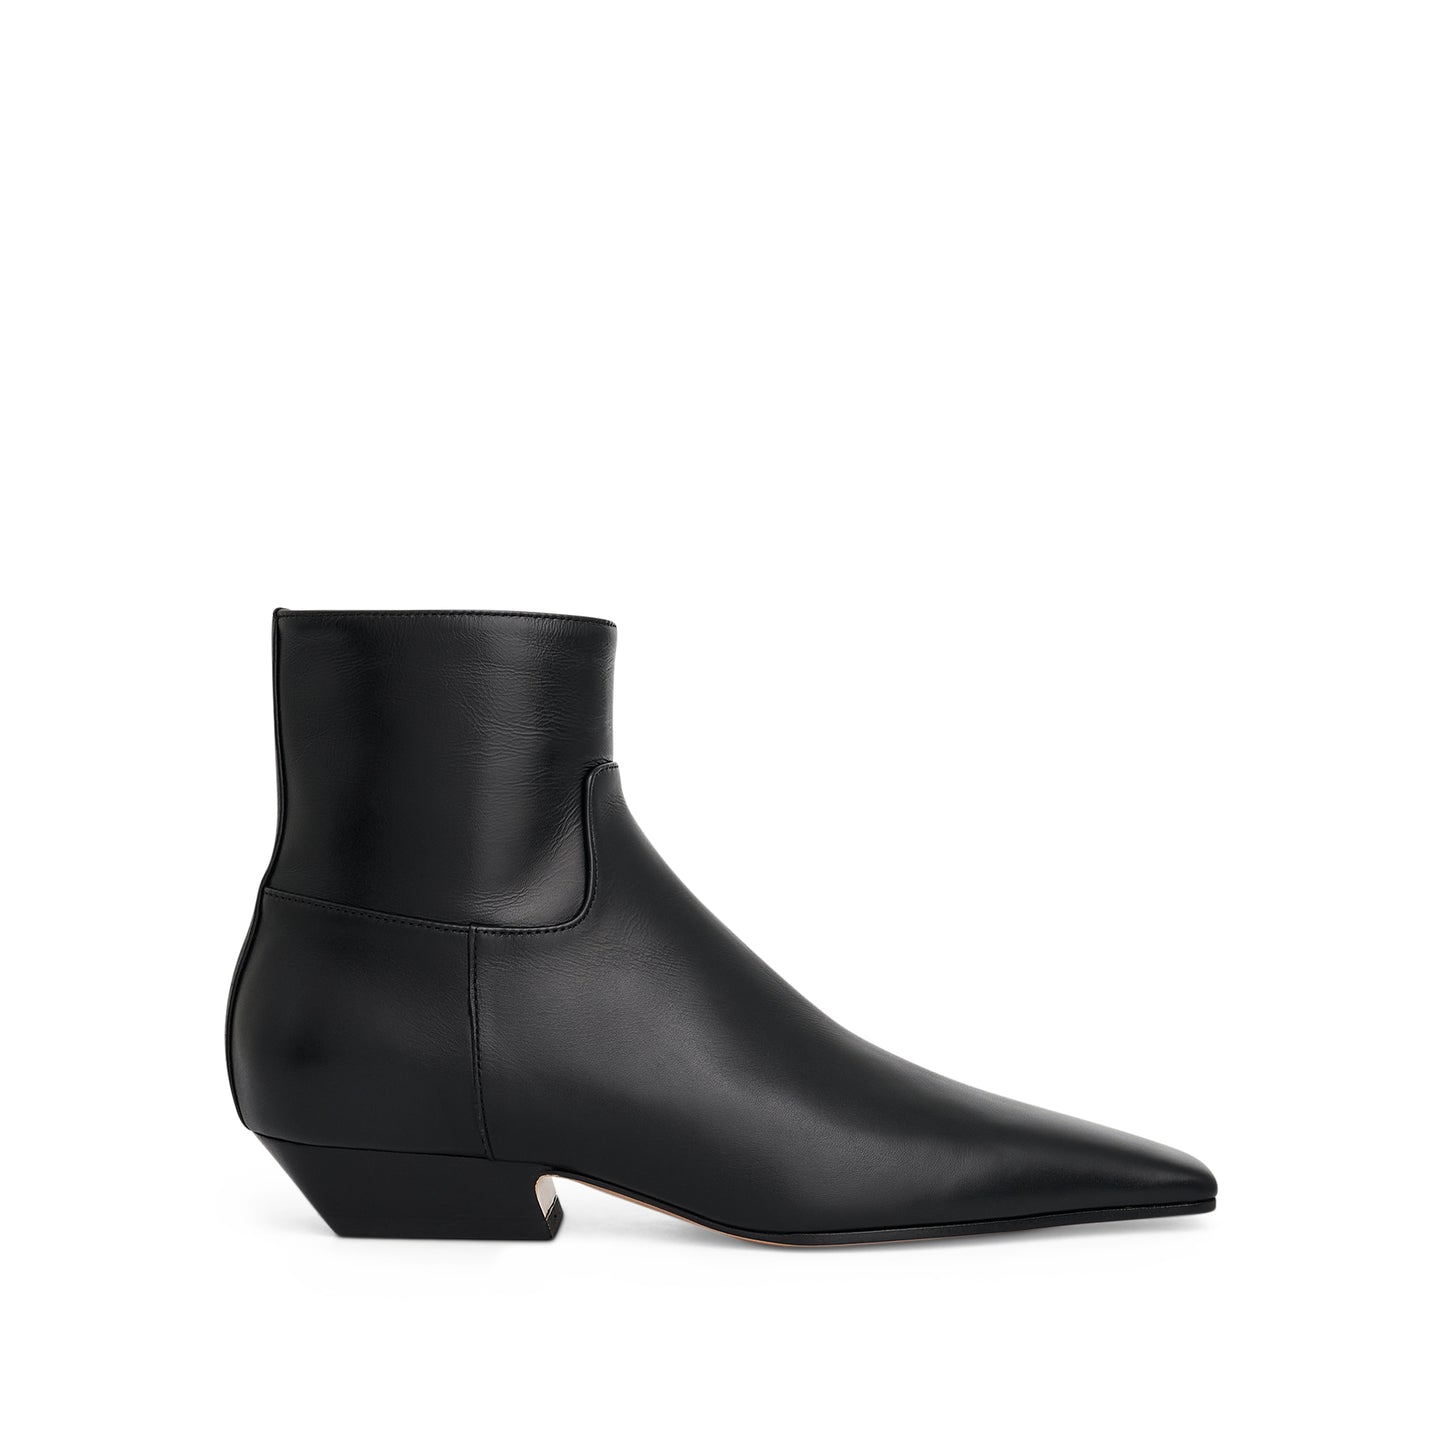 Marfa Classic Flat Ankle Boots in Black